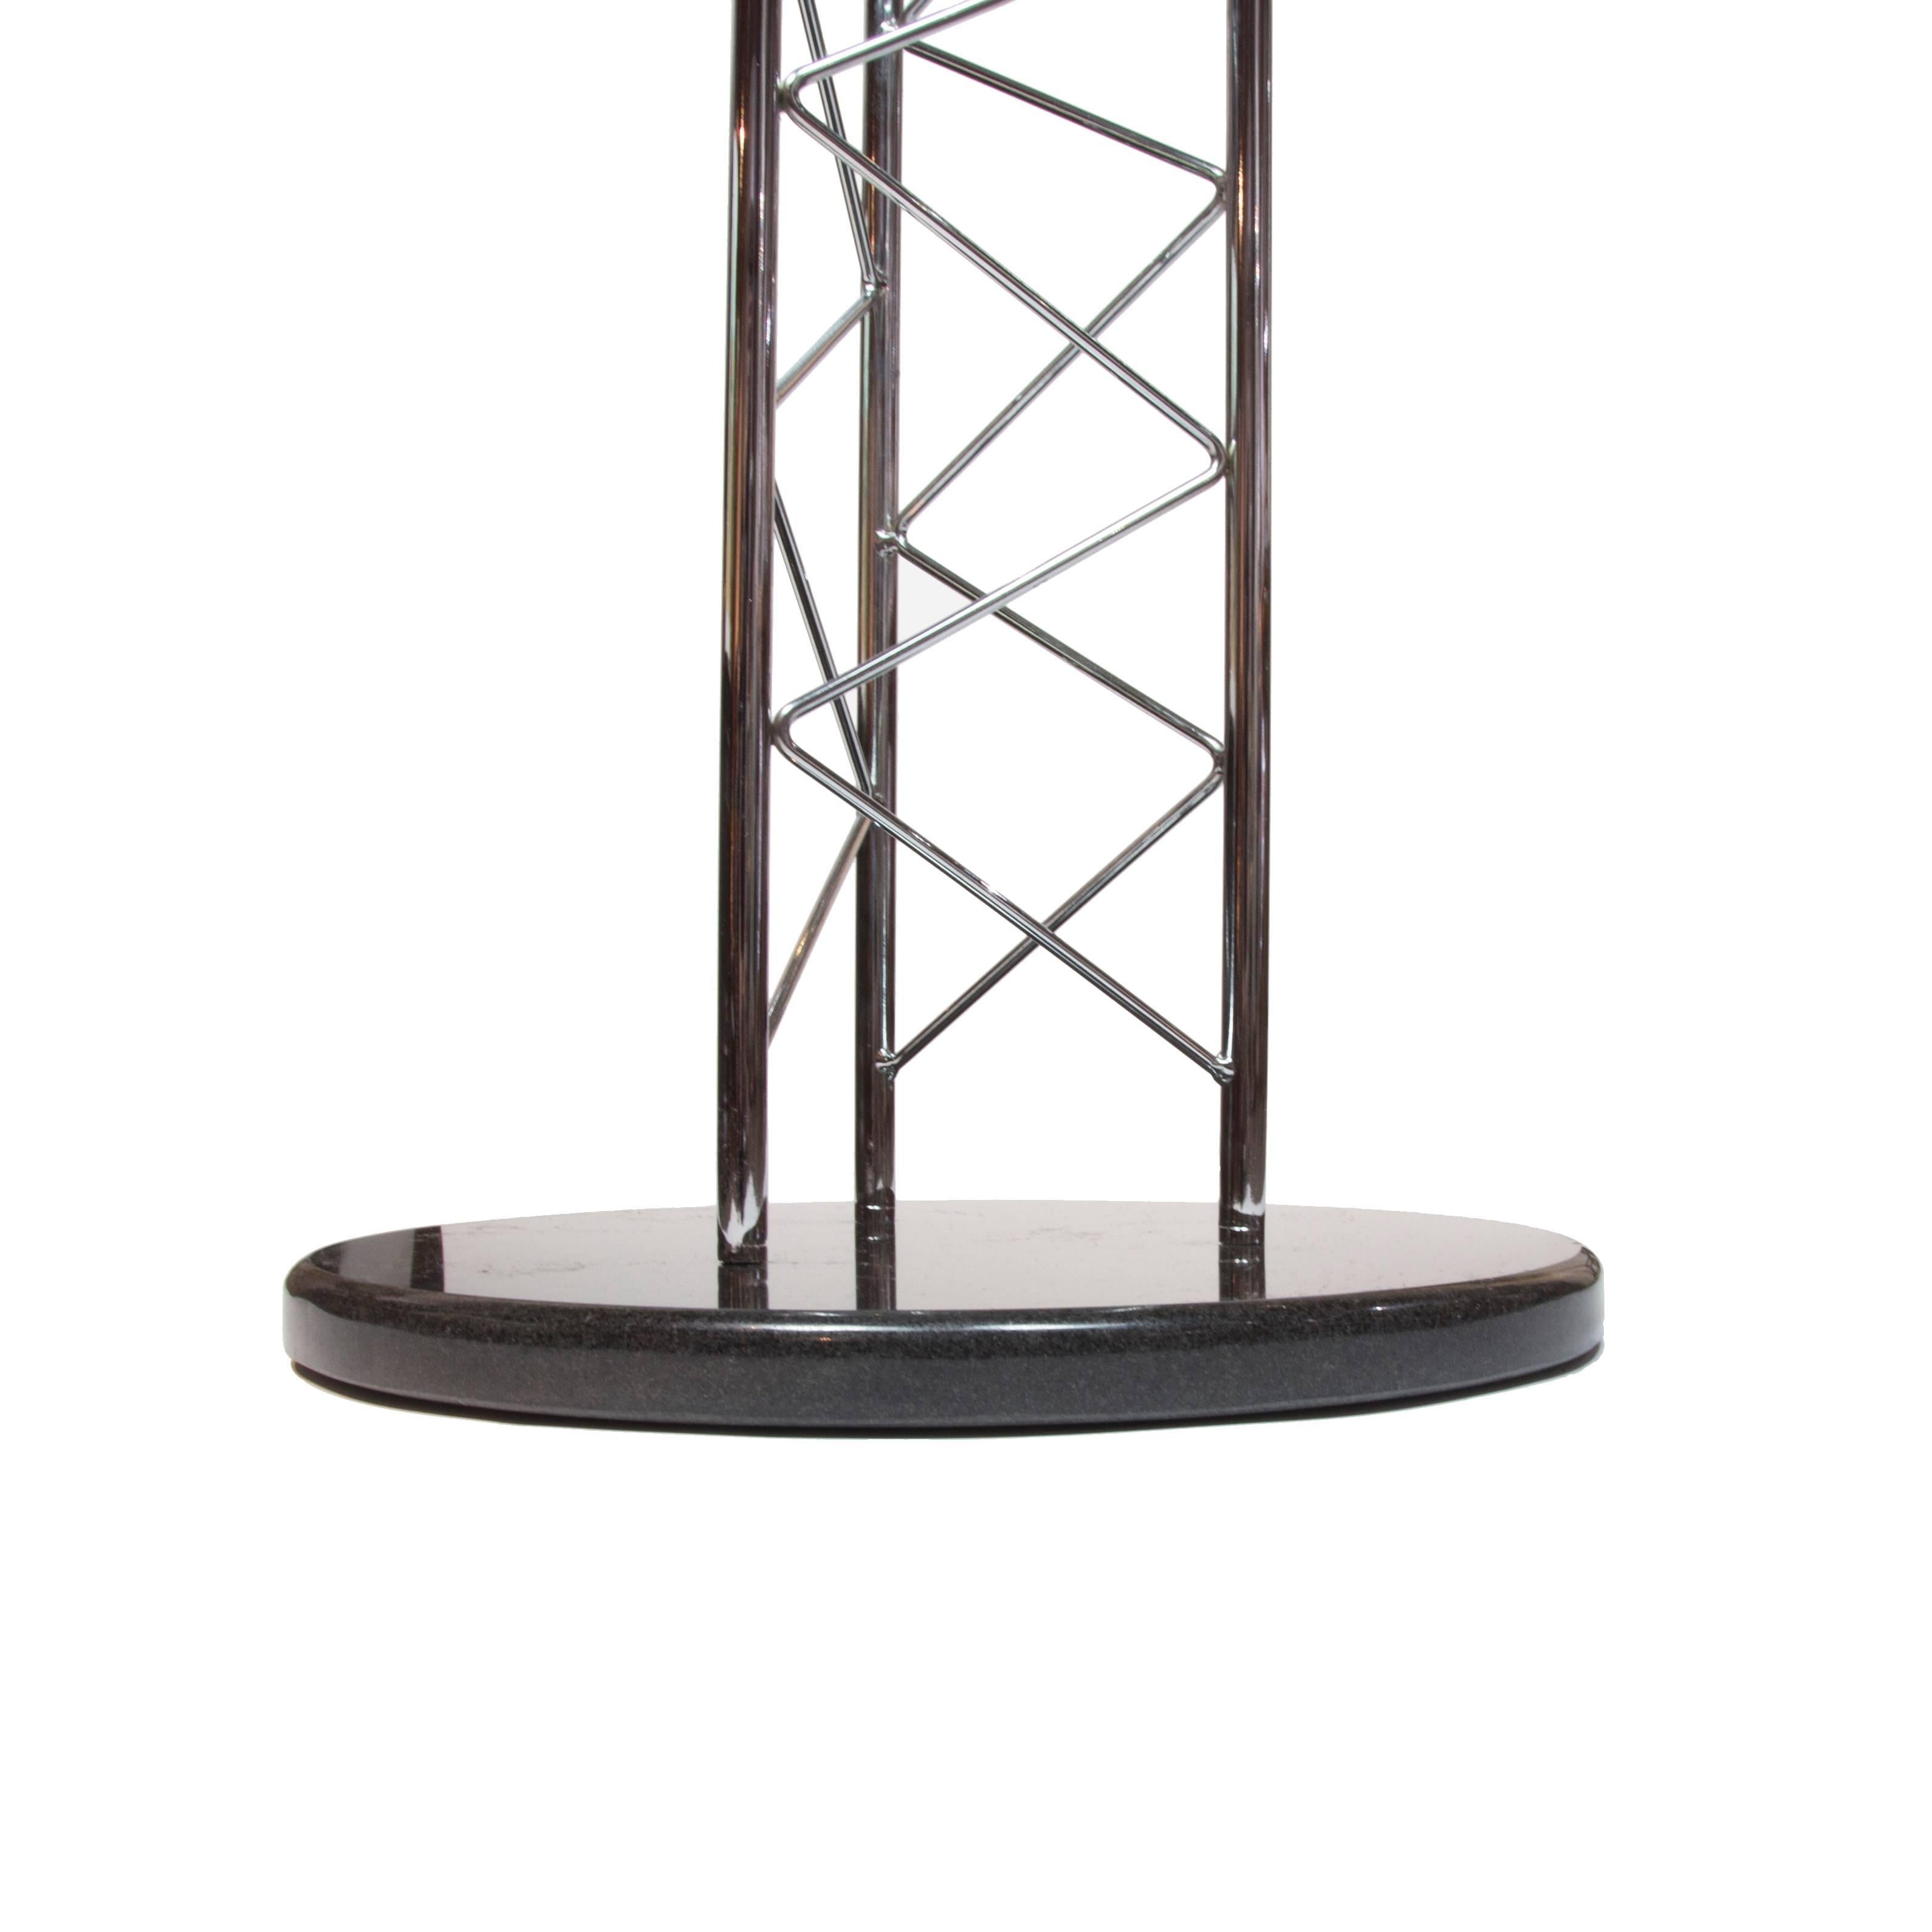 Chic Avant-Garde Mid-Century Modern truss side table features a chrome sculptural base and the round tabletop is thick glass with a polished edge.
   